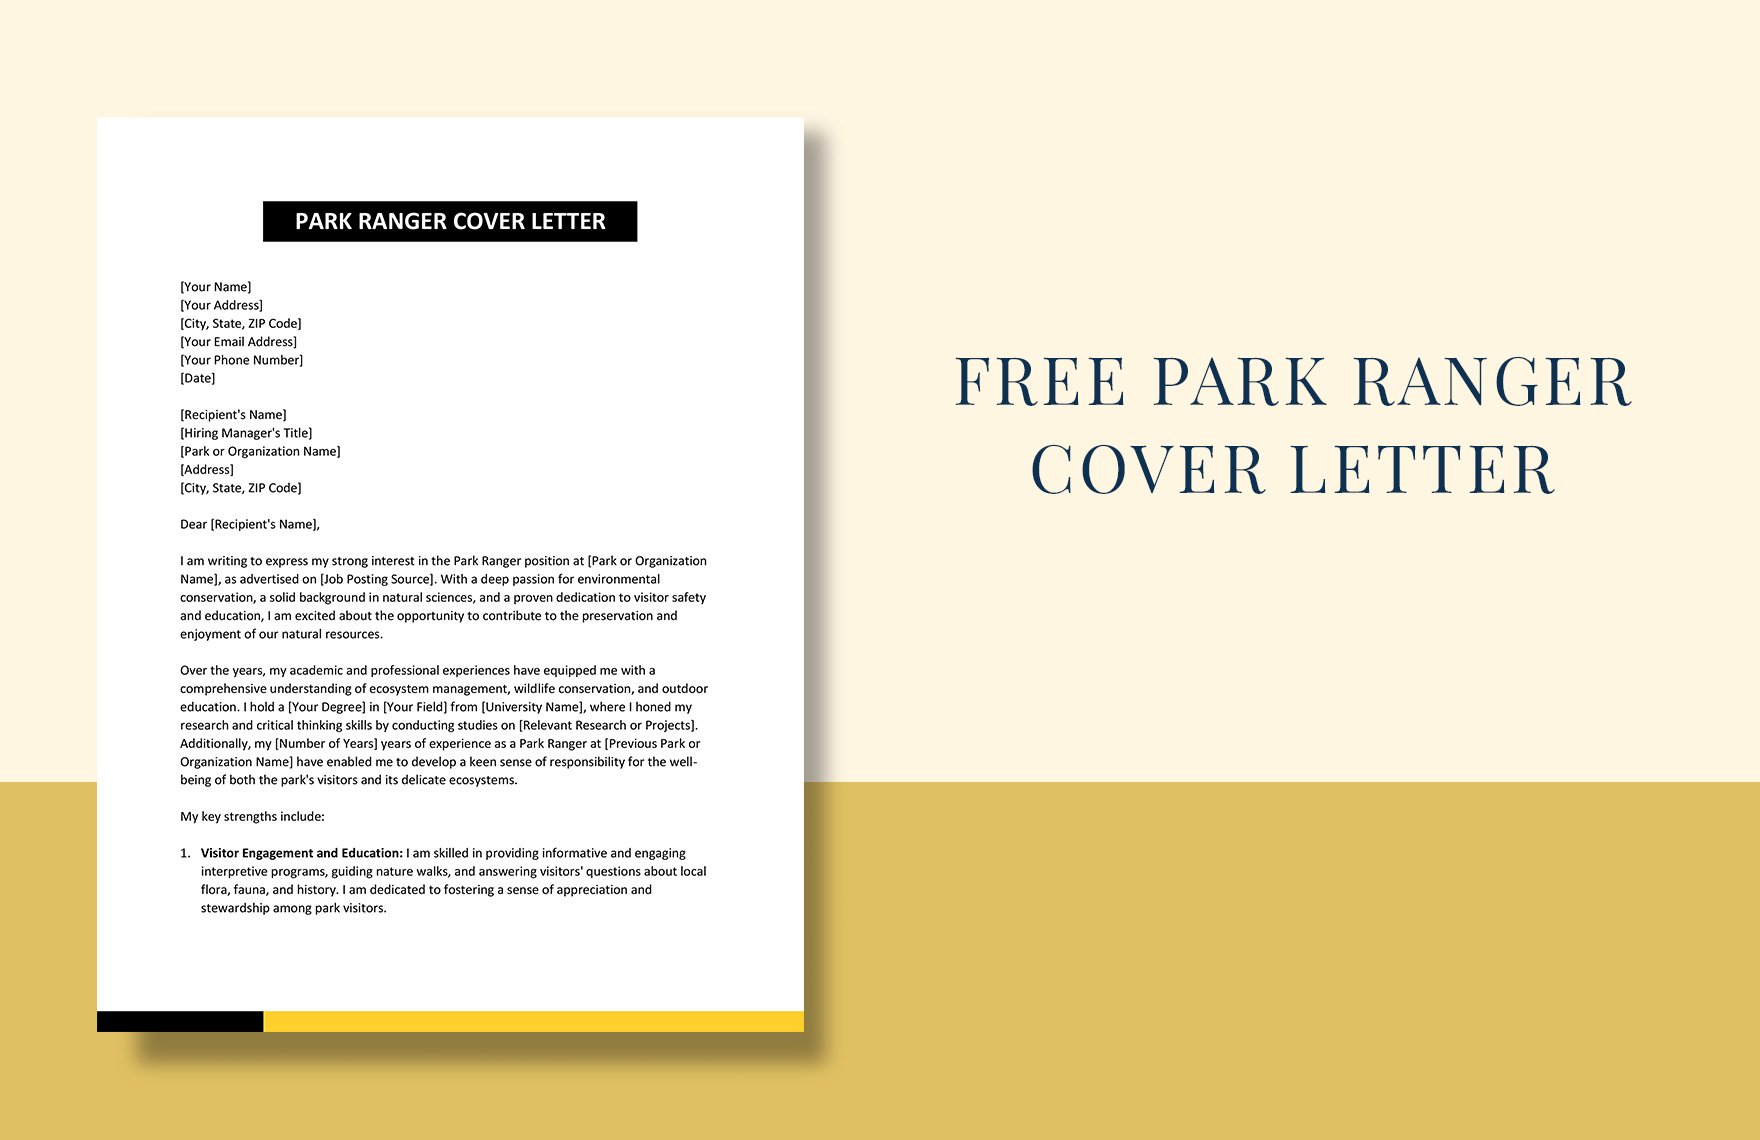 Park Ranger Cover Letter in Word, Google Docs, Apple Pages